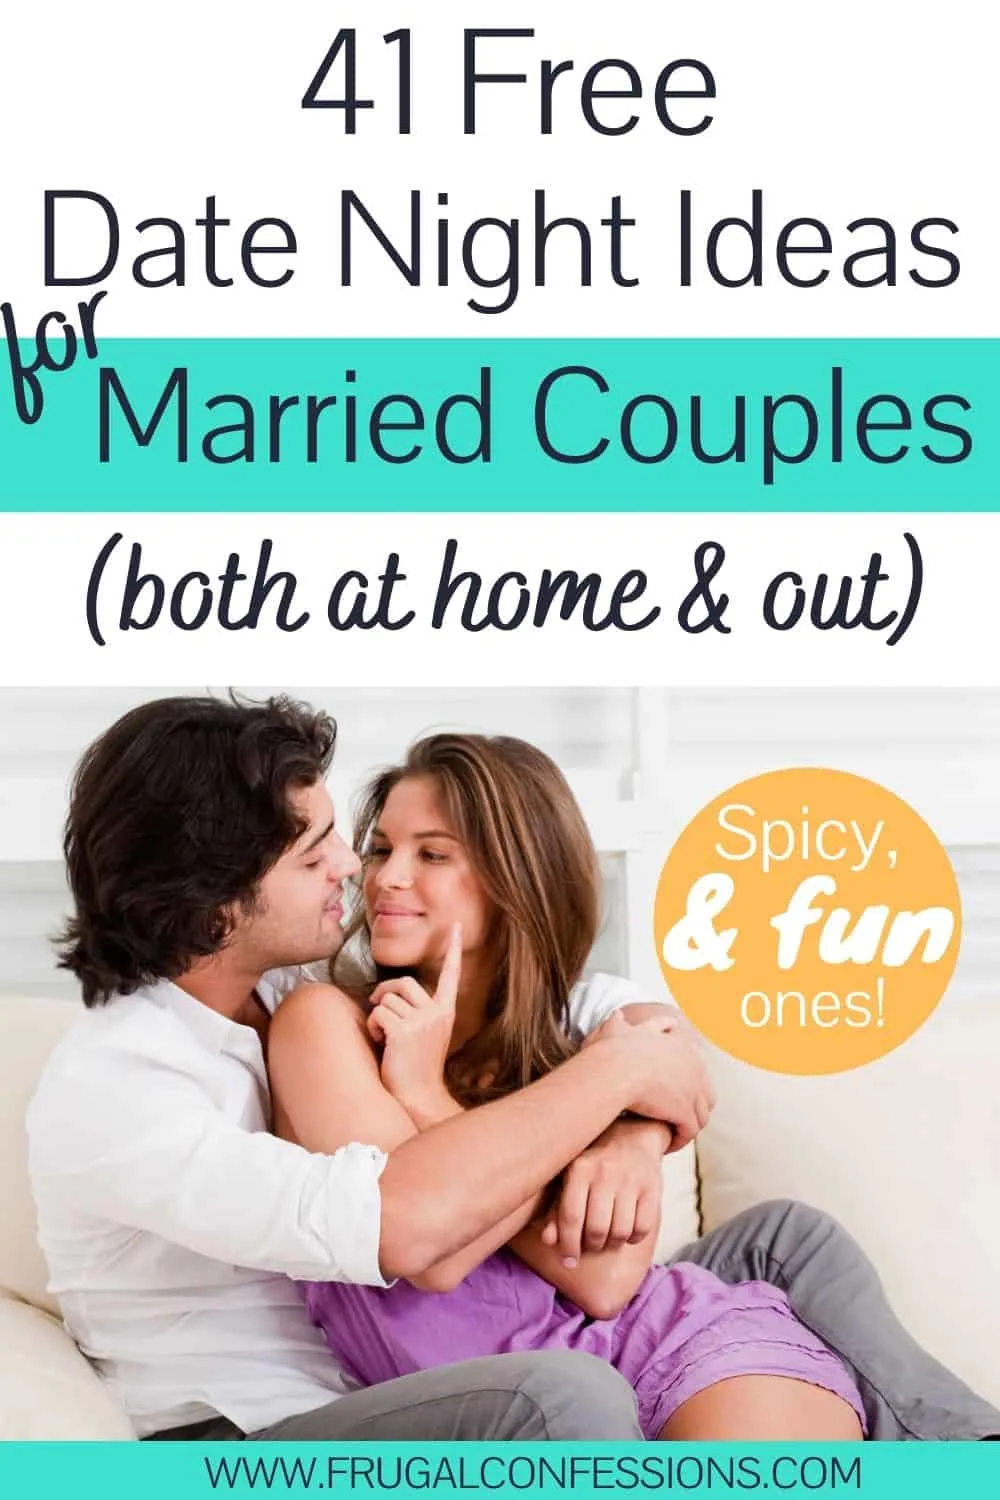 41 Free Date Ideas for Married Couples At Home (Romantic + Fun)